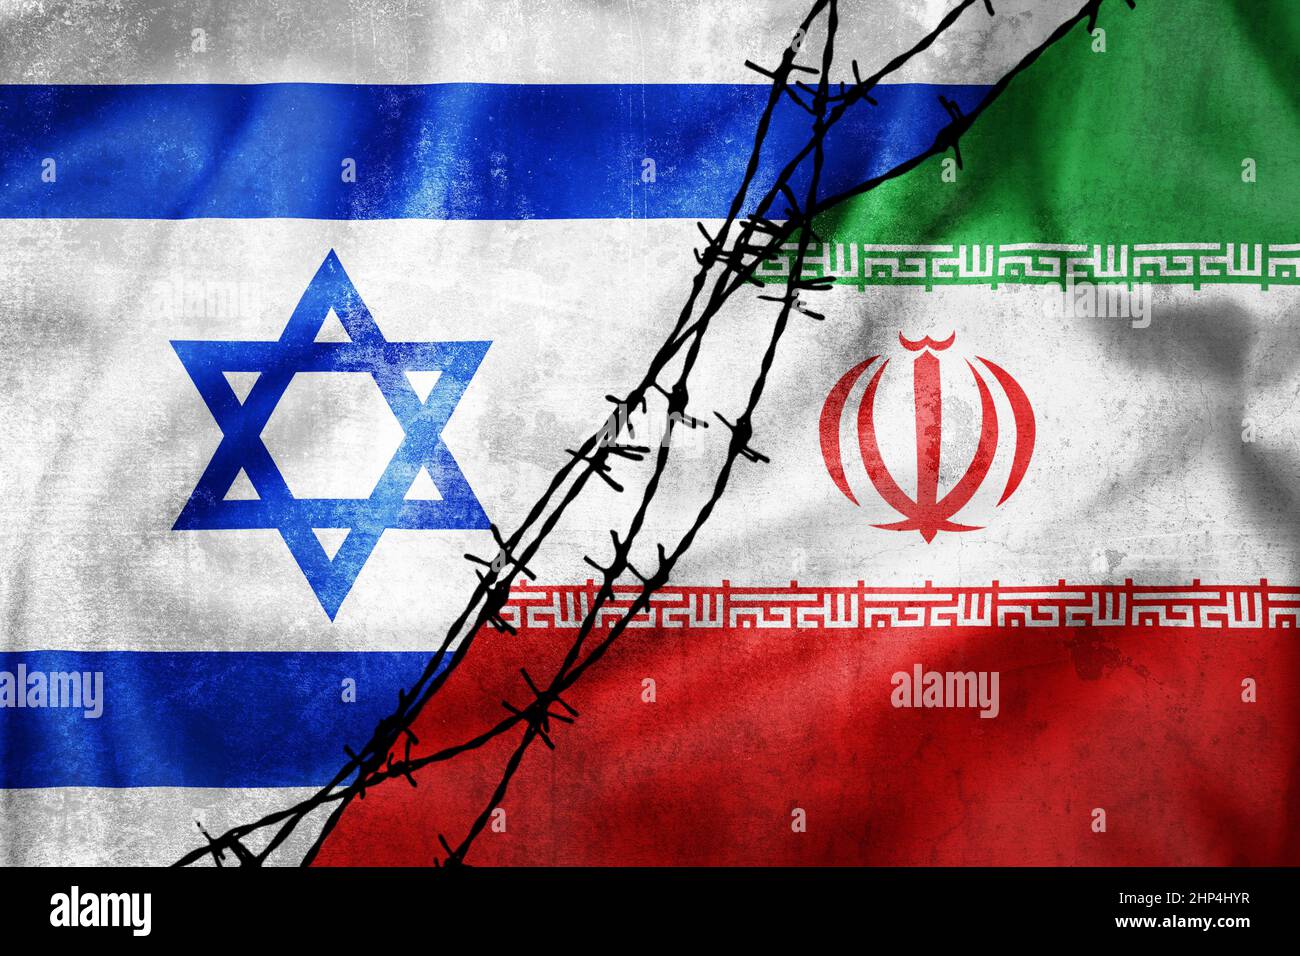 Grunge flags of Iran and Israel divided by barb wire illustration, concept of tense relations between Iran and Israel Stock Photo